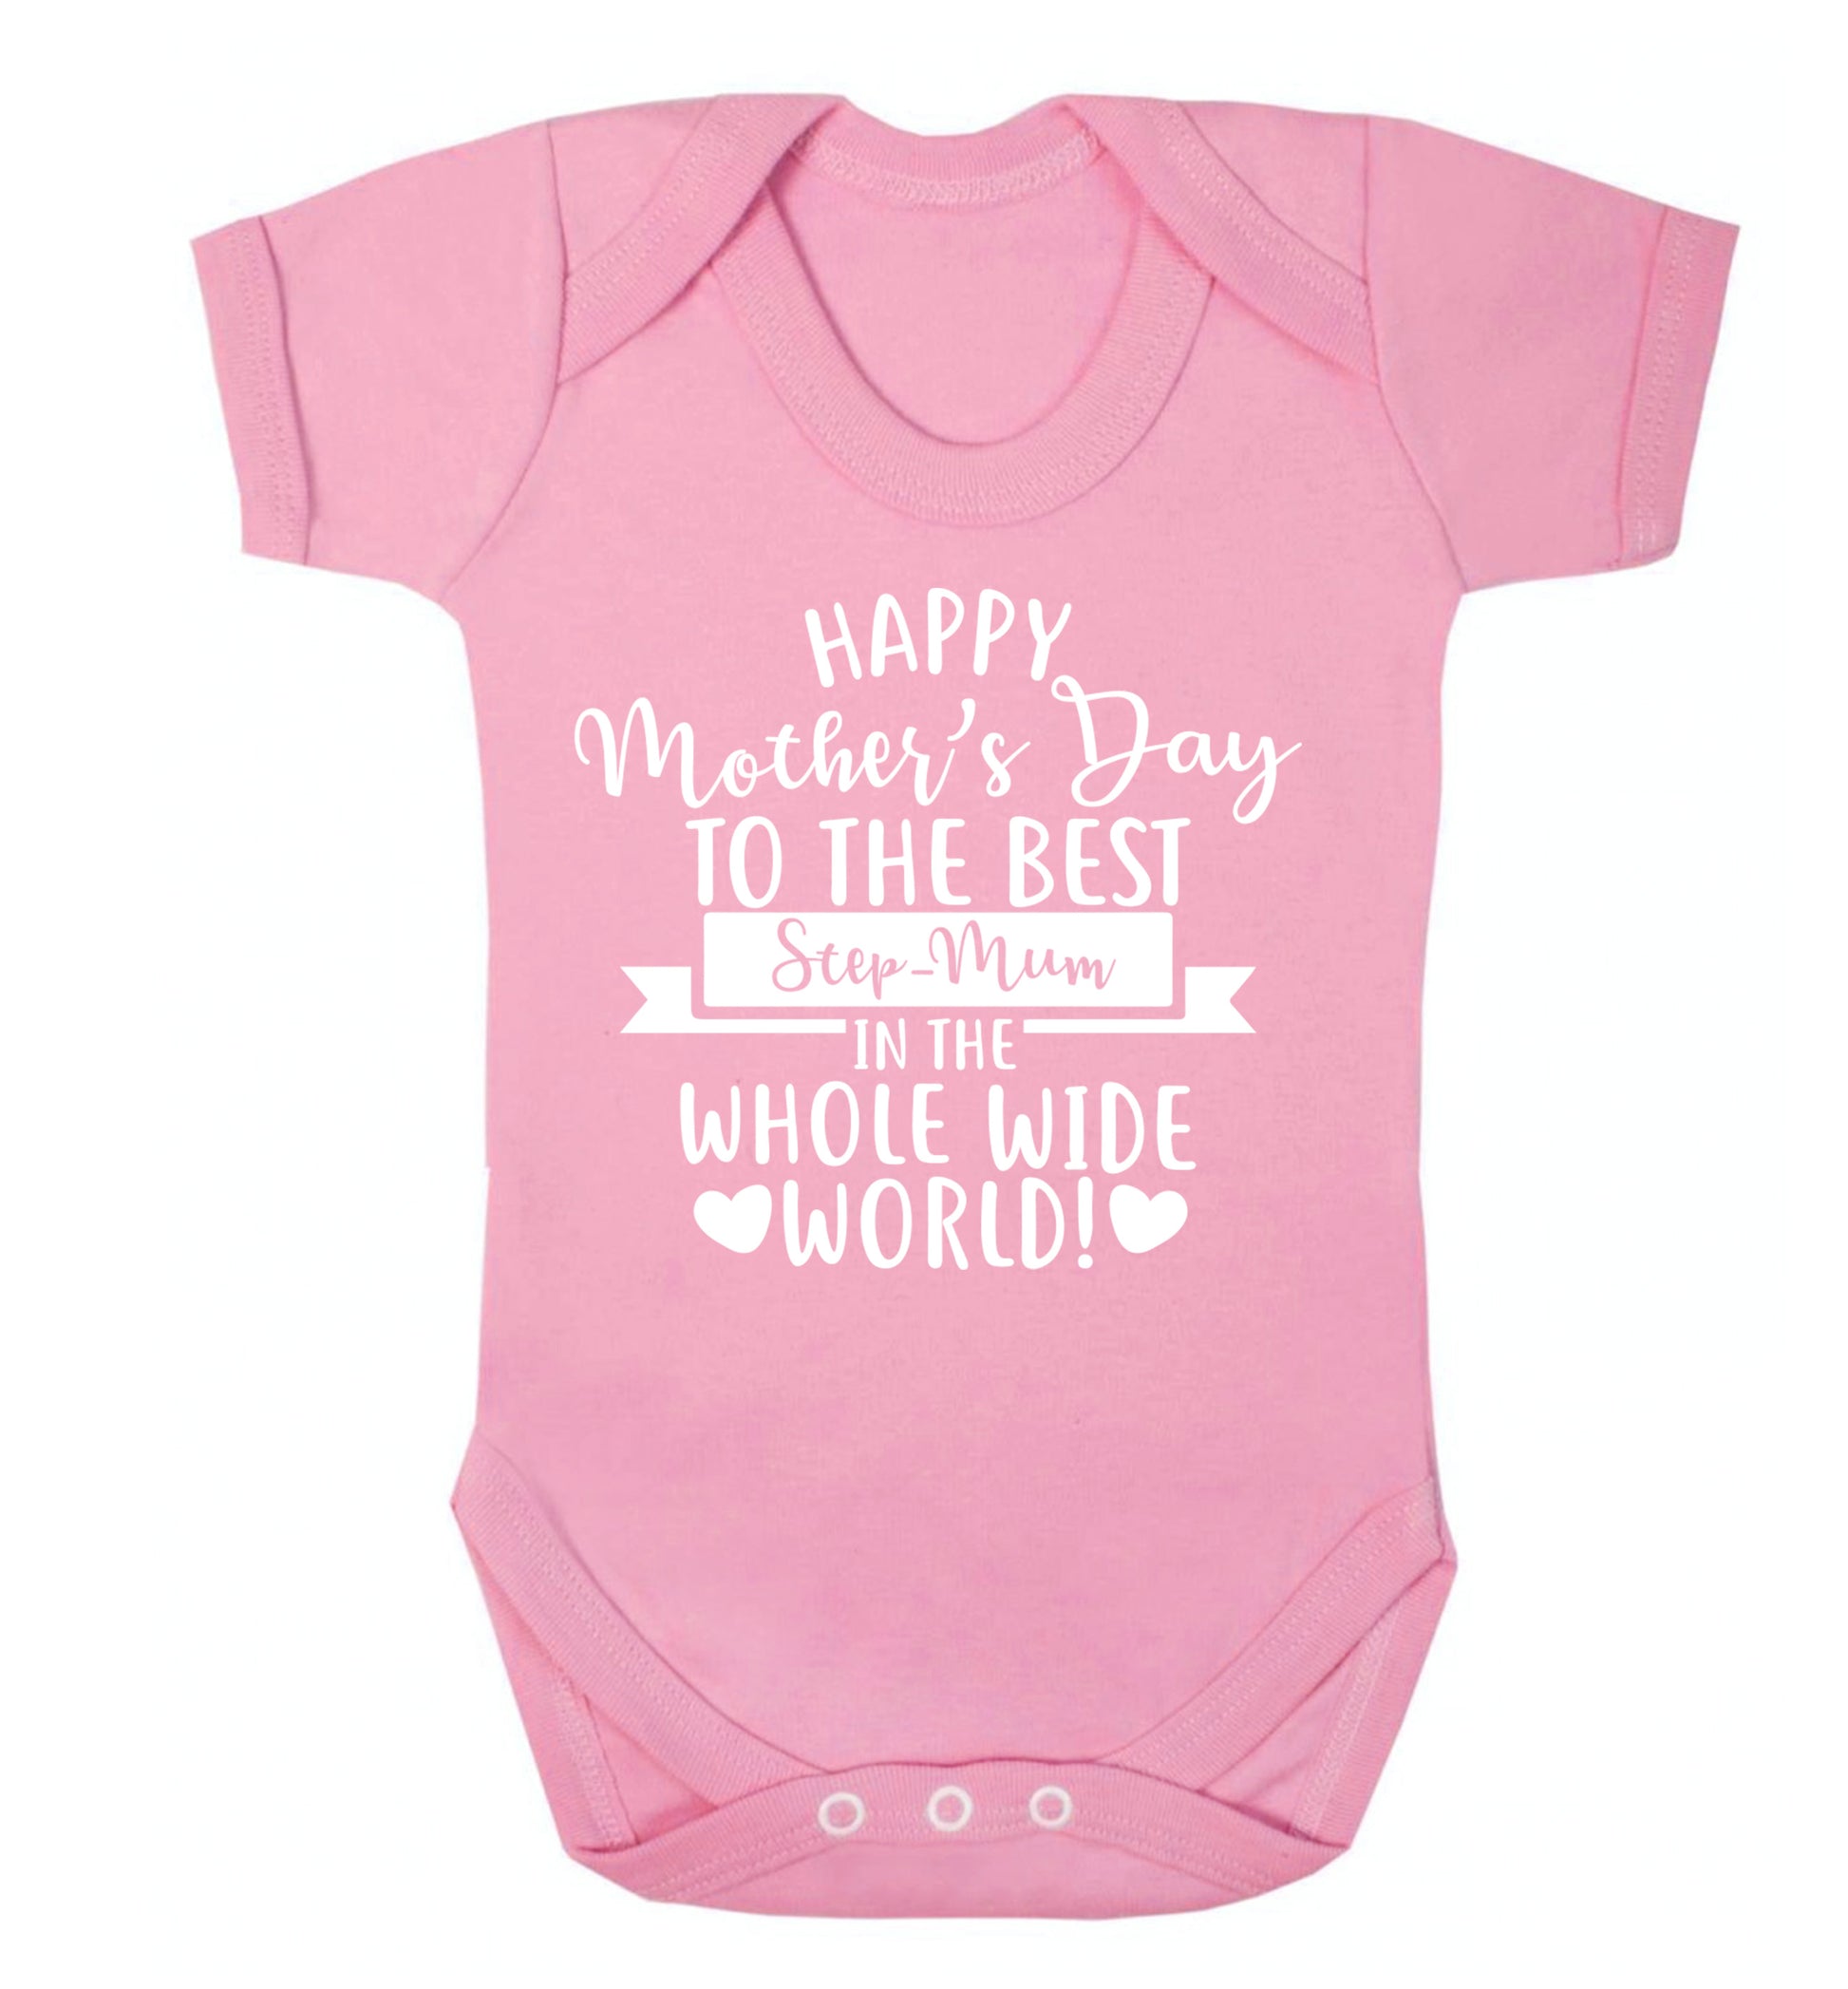 Happy mother's day to the best step-mum in the world Baby Vest pale pink 18-24 months